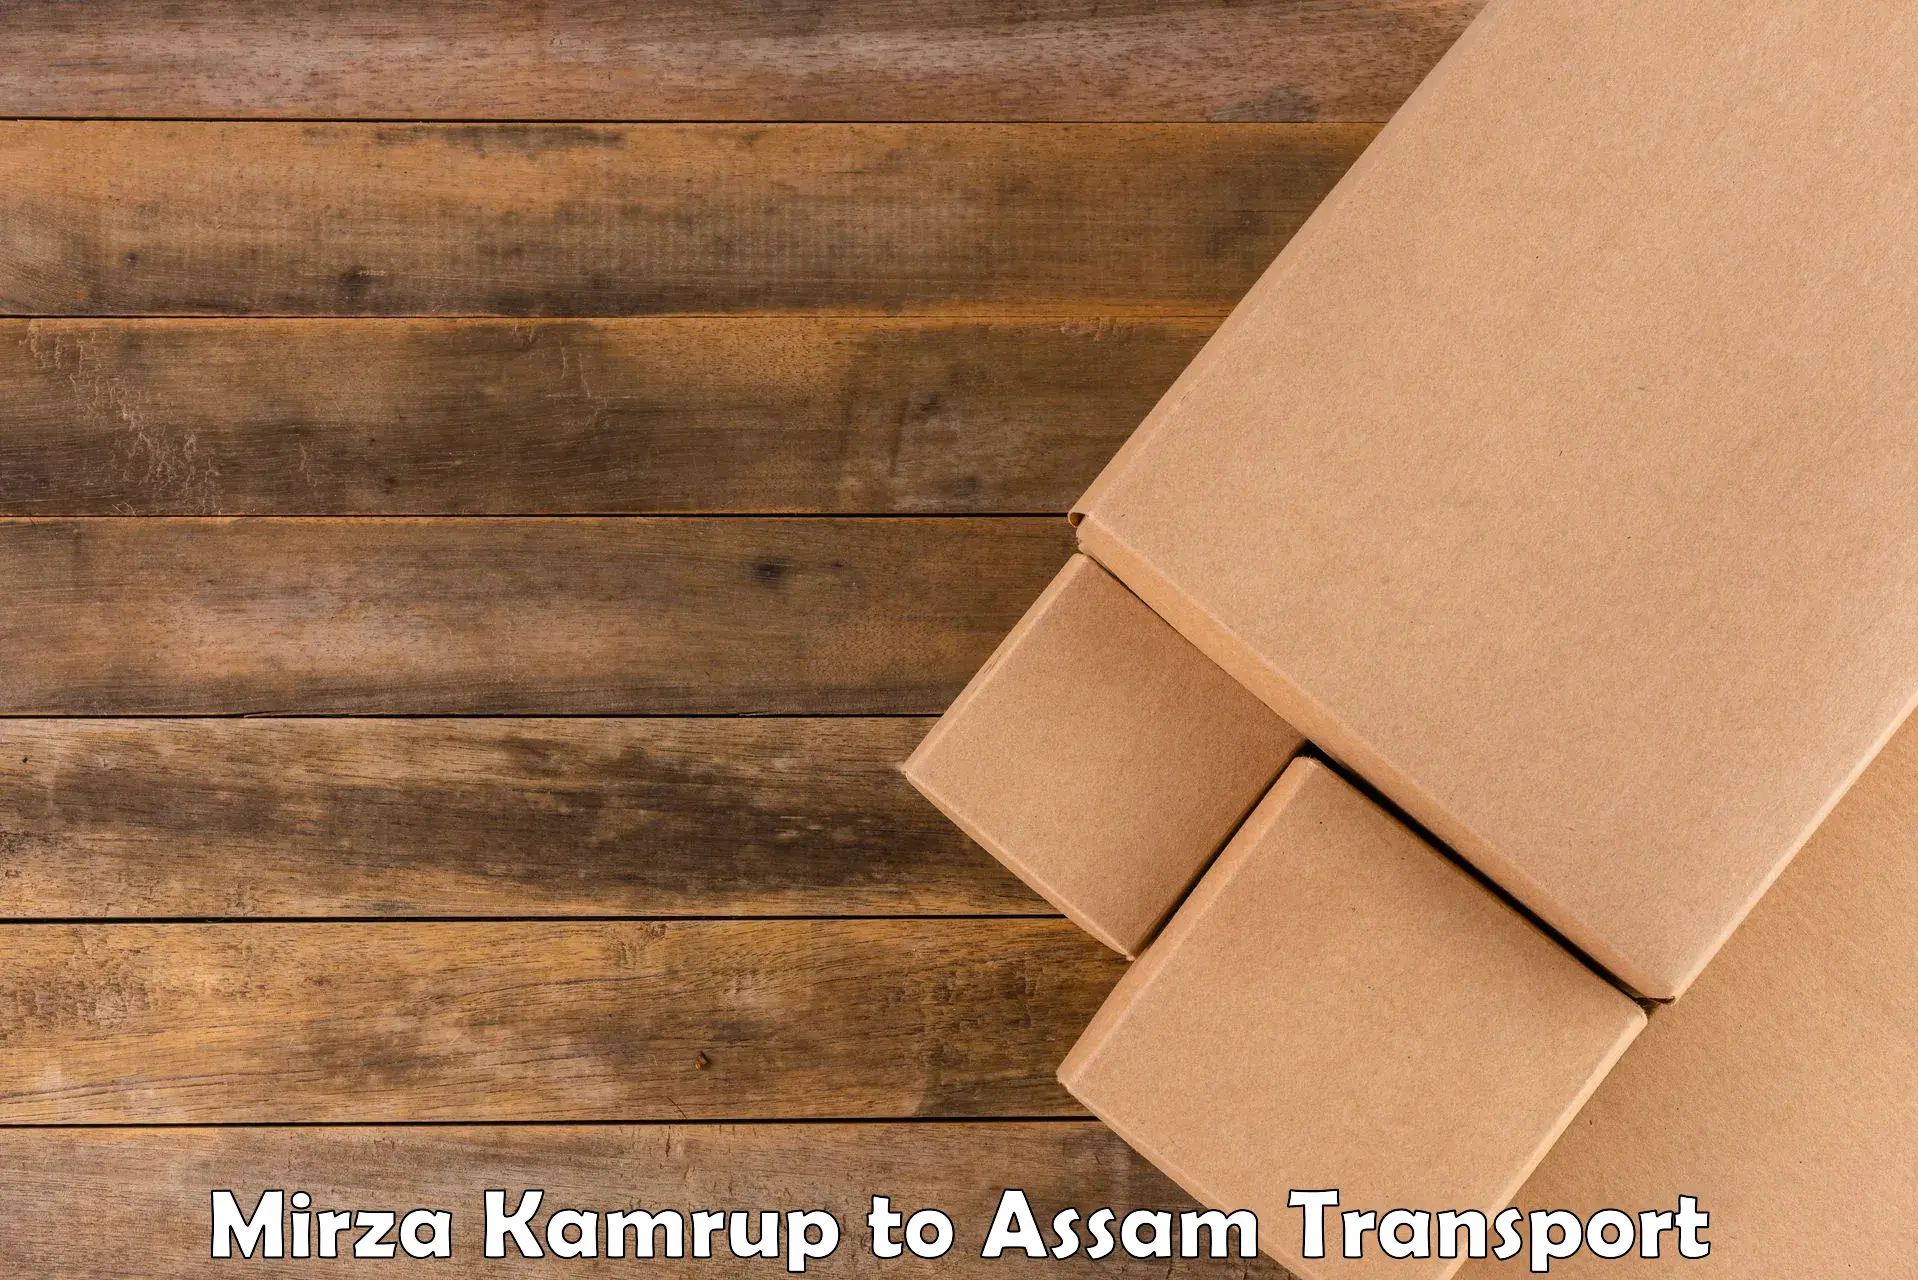 Pick up transport service in Mirza Kamrup to Assam